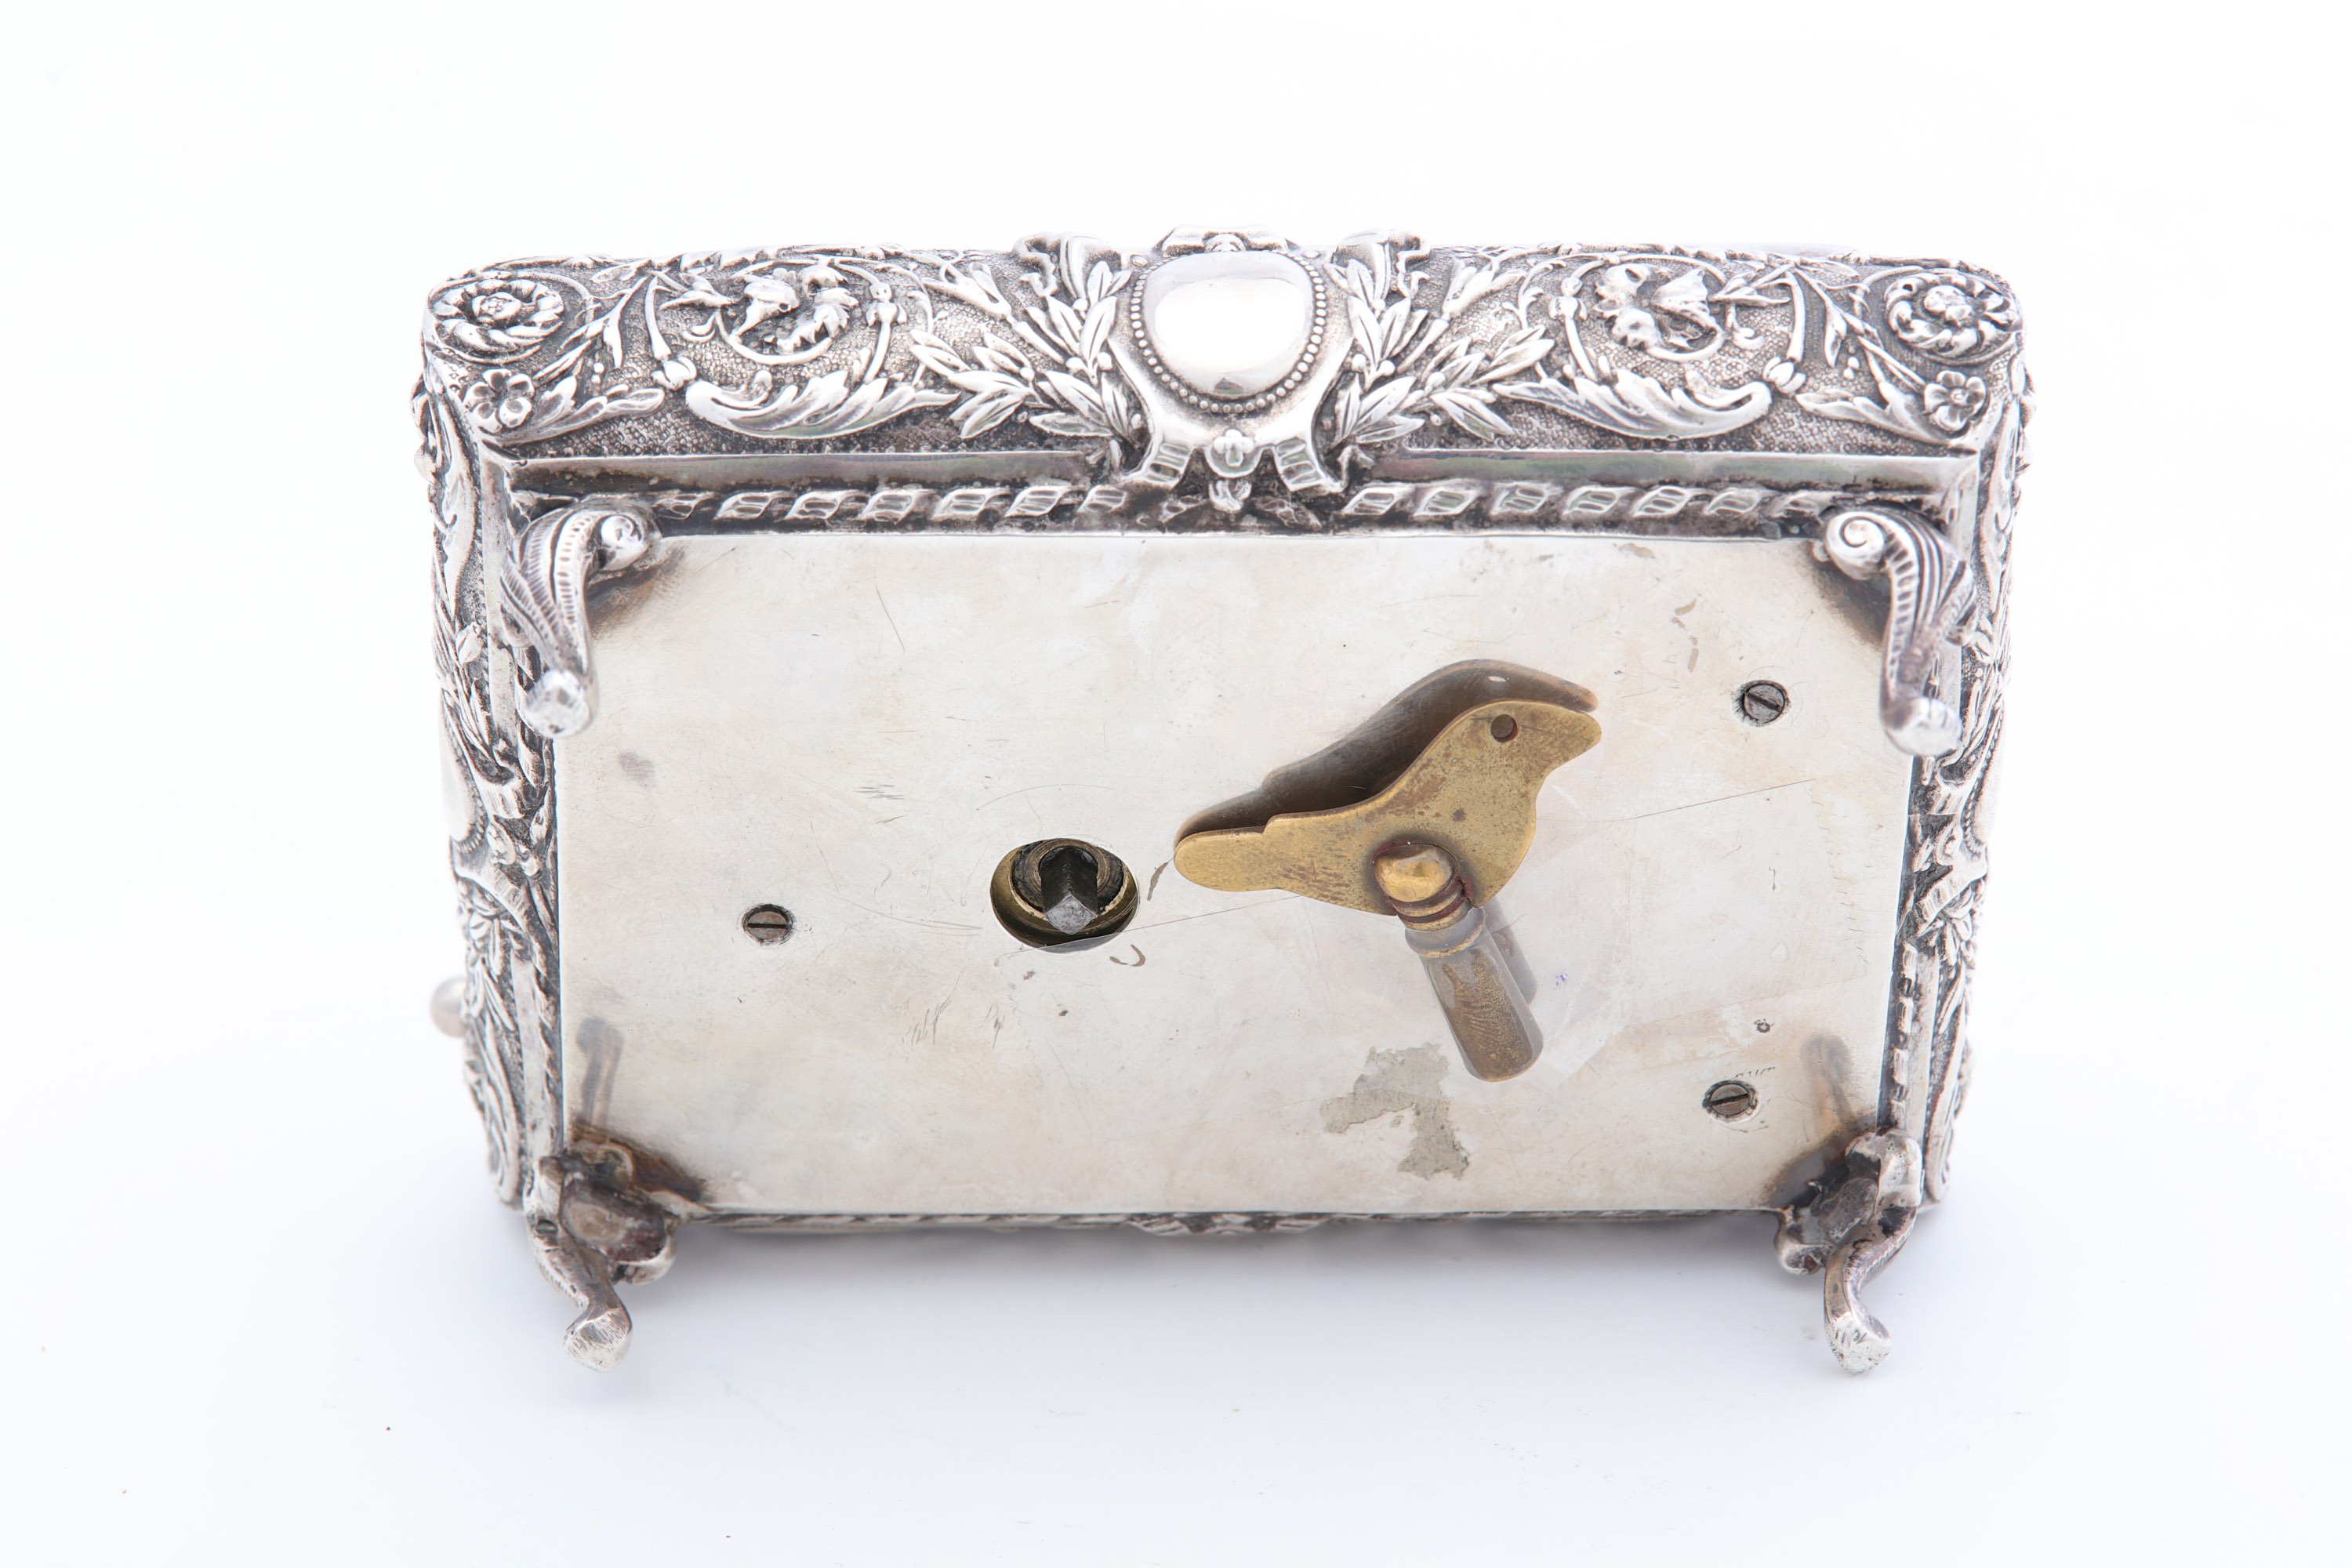 An early 20th century sterling silver singing bird box, by Karl Griesbaum circa 1920 - Image 5 of 6